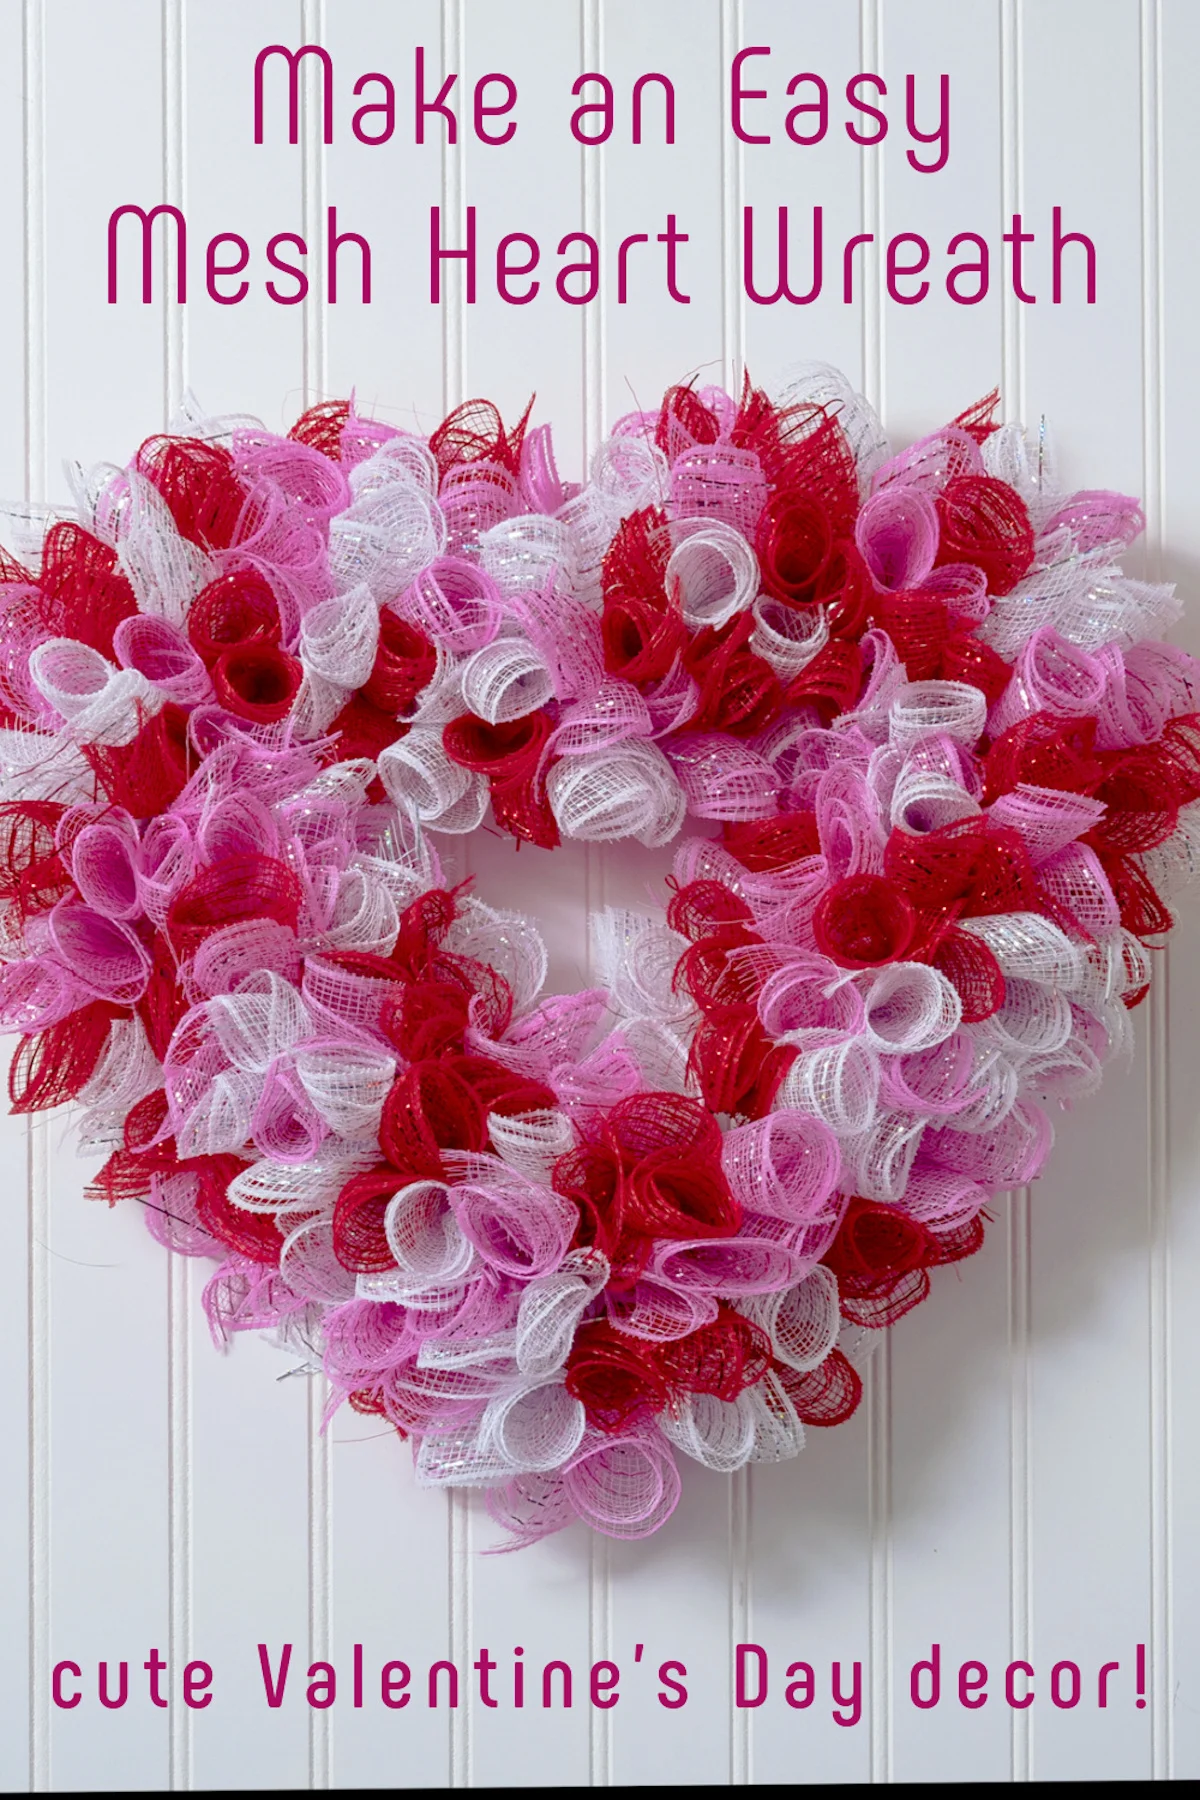 Dollar Store Heart Wreaths - 3 Different Styles 